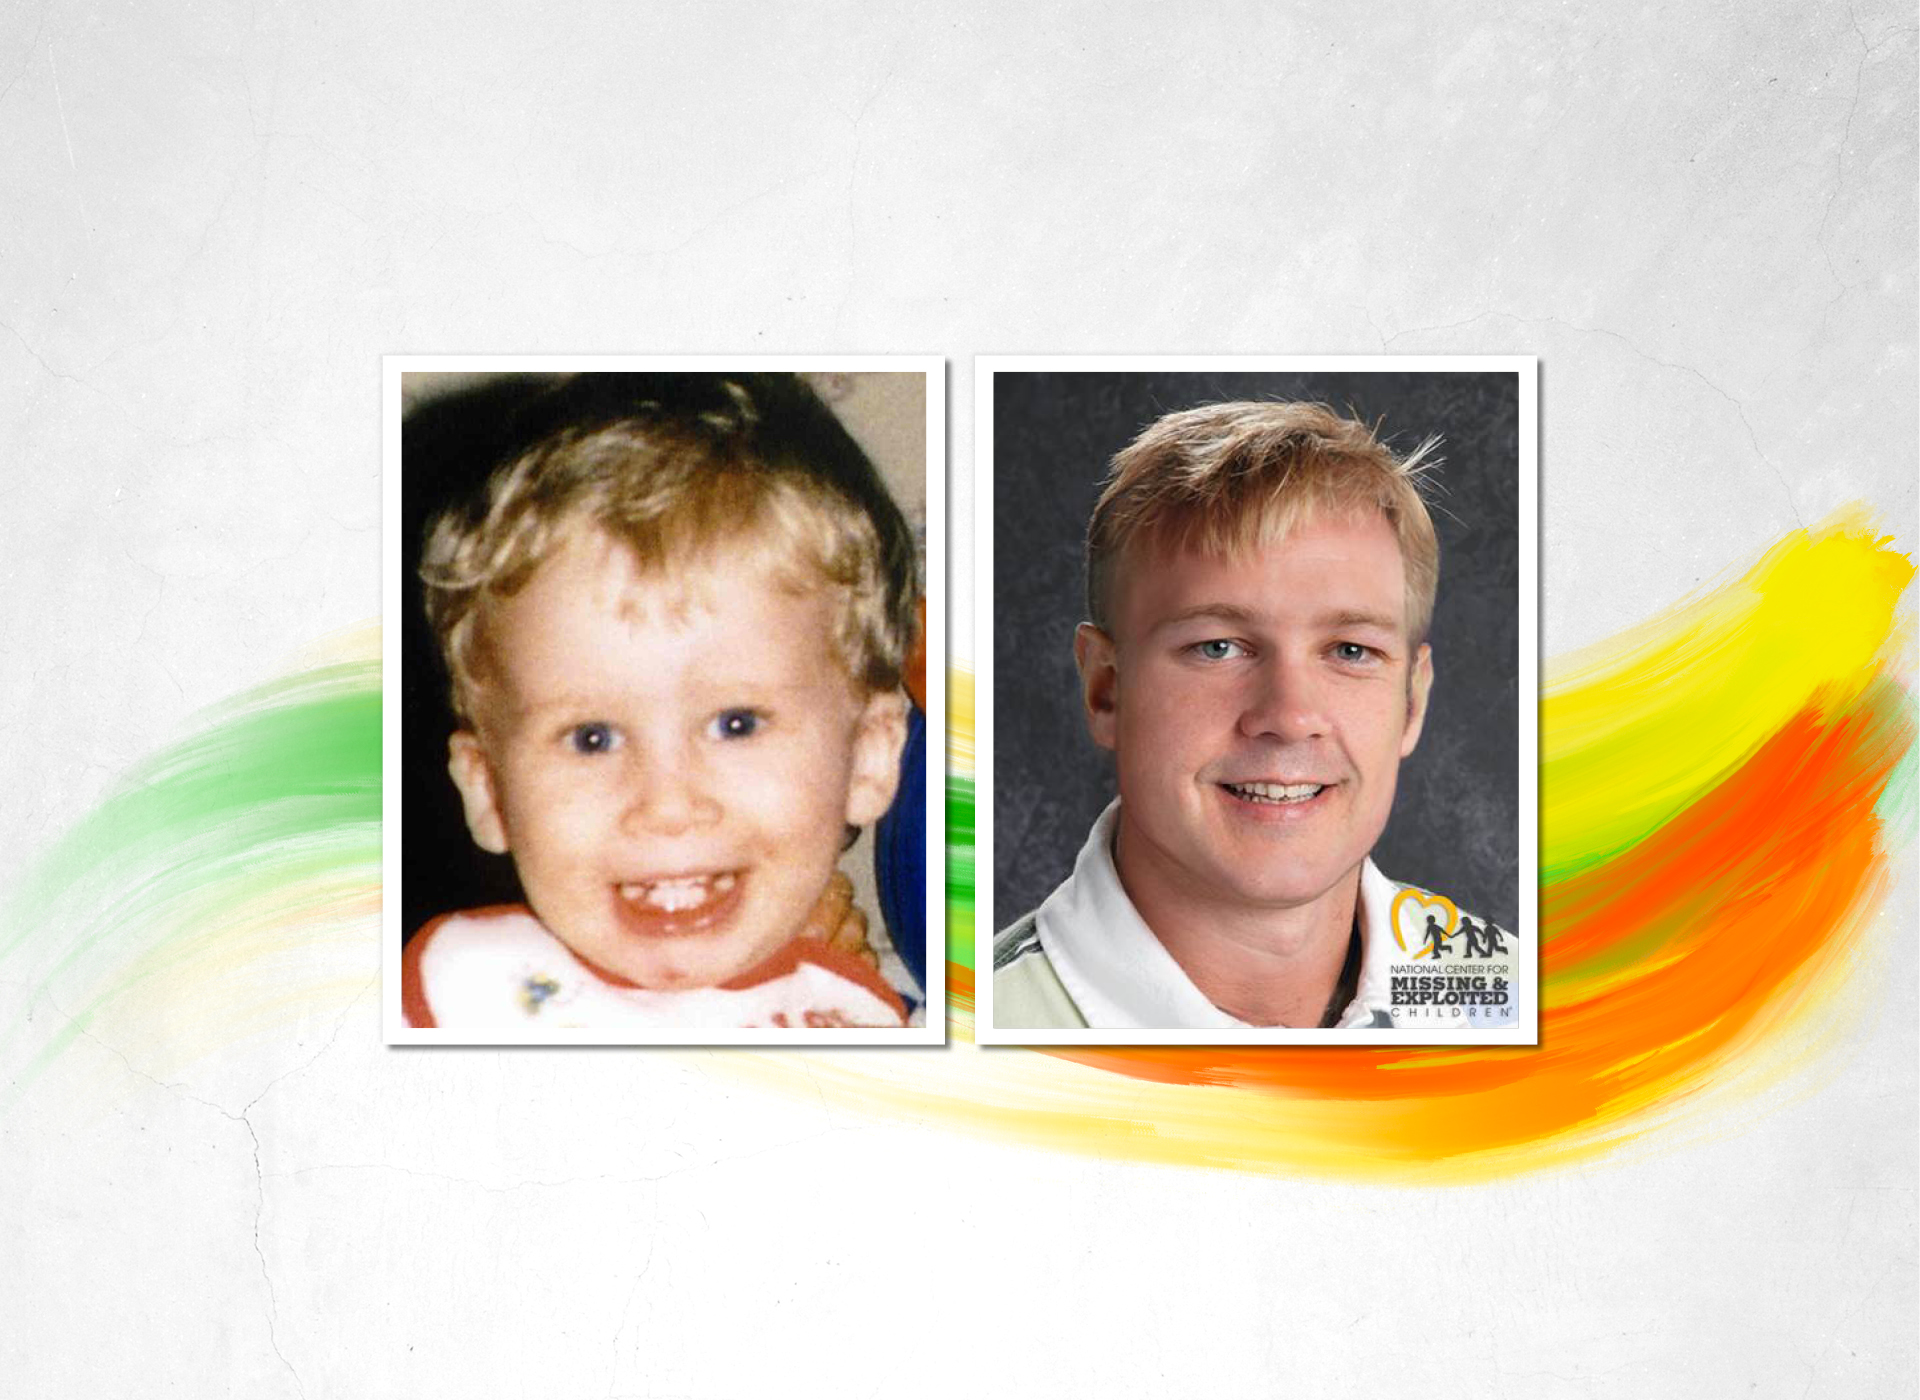 Pictures of Cody at 3 and age progressed to 28 years old